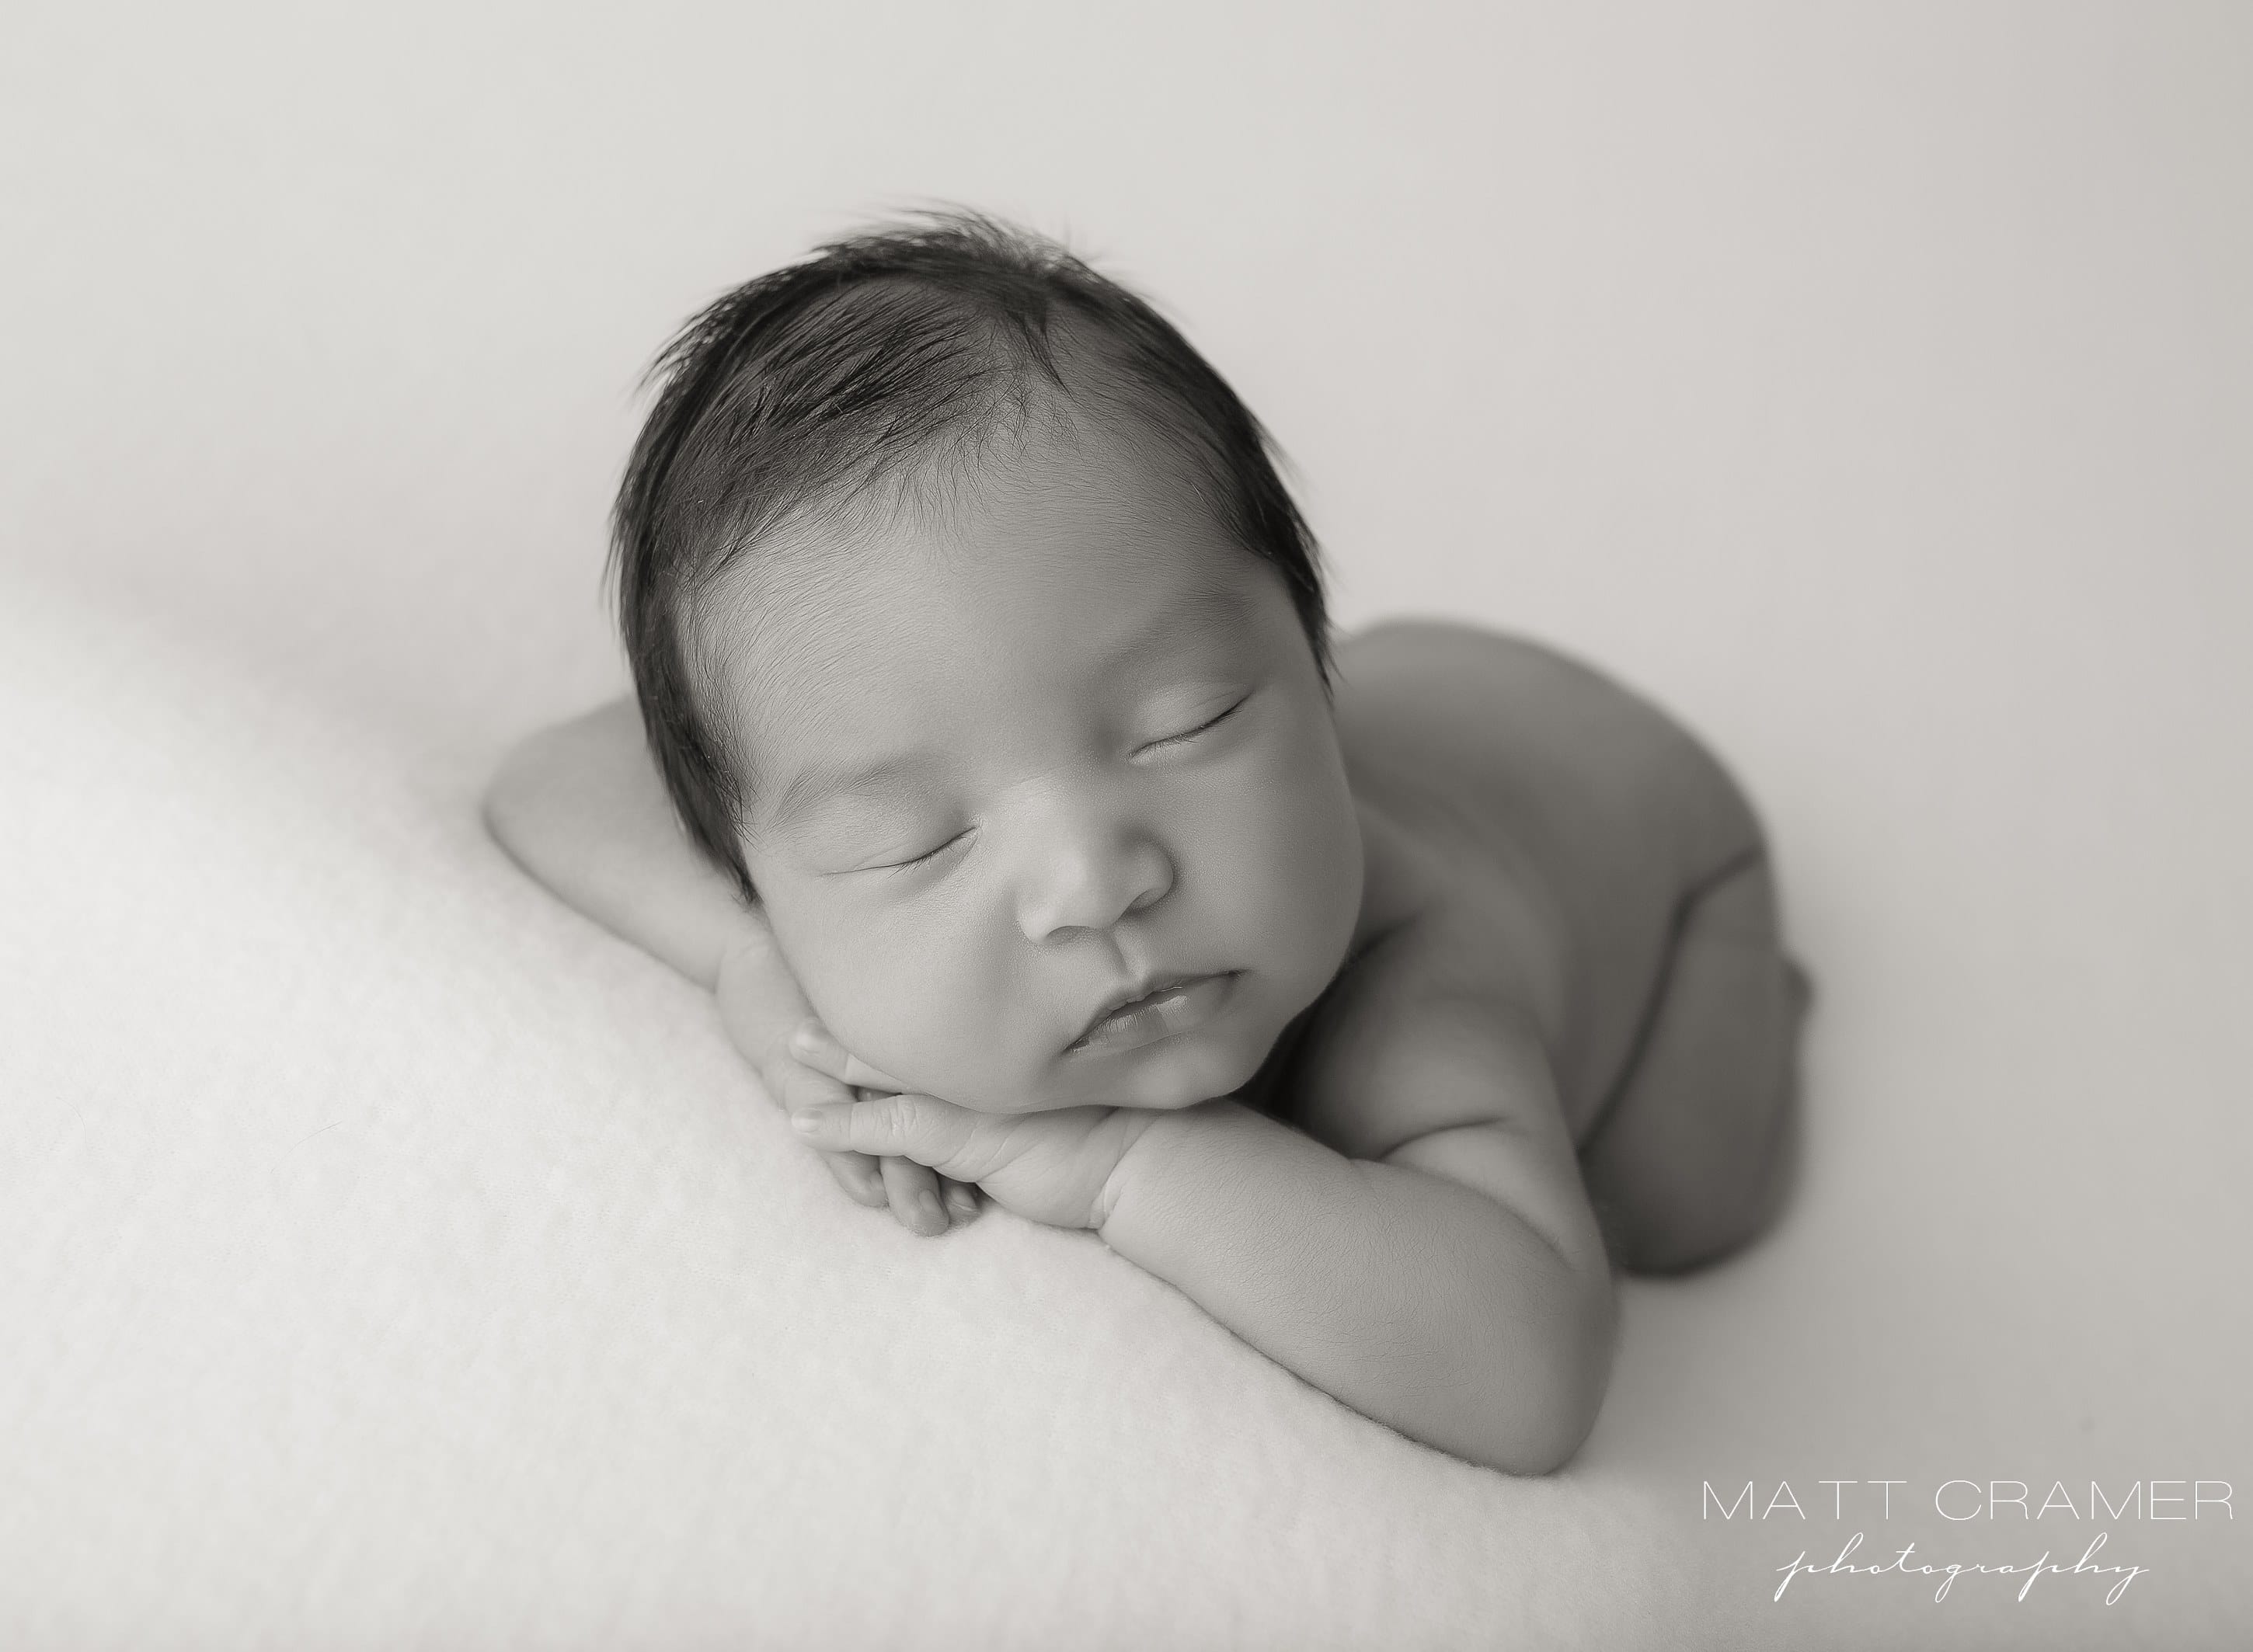 black and white photo of baby boy posed on solid fabric during a newborn photo shoot